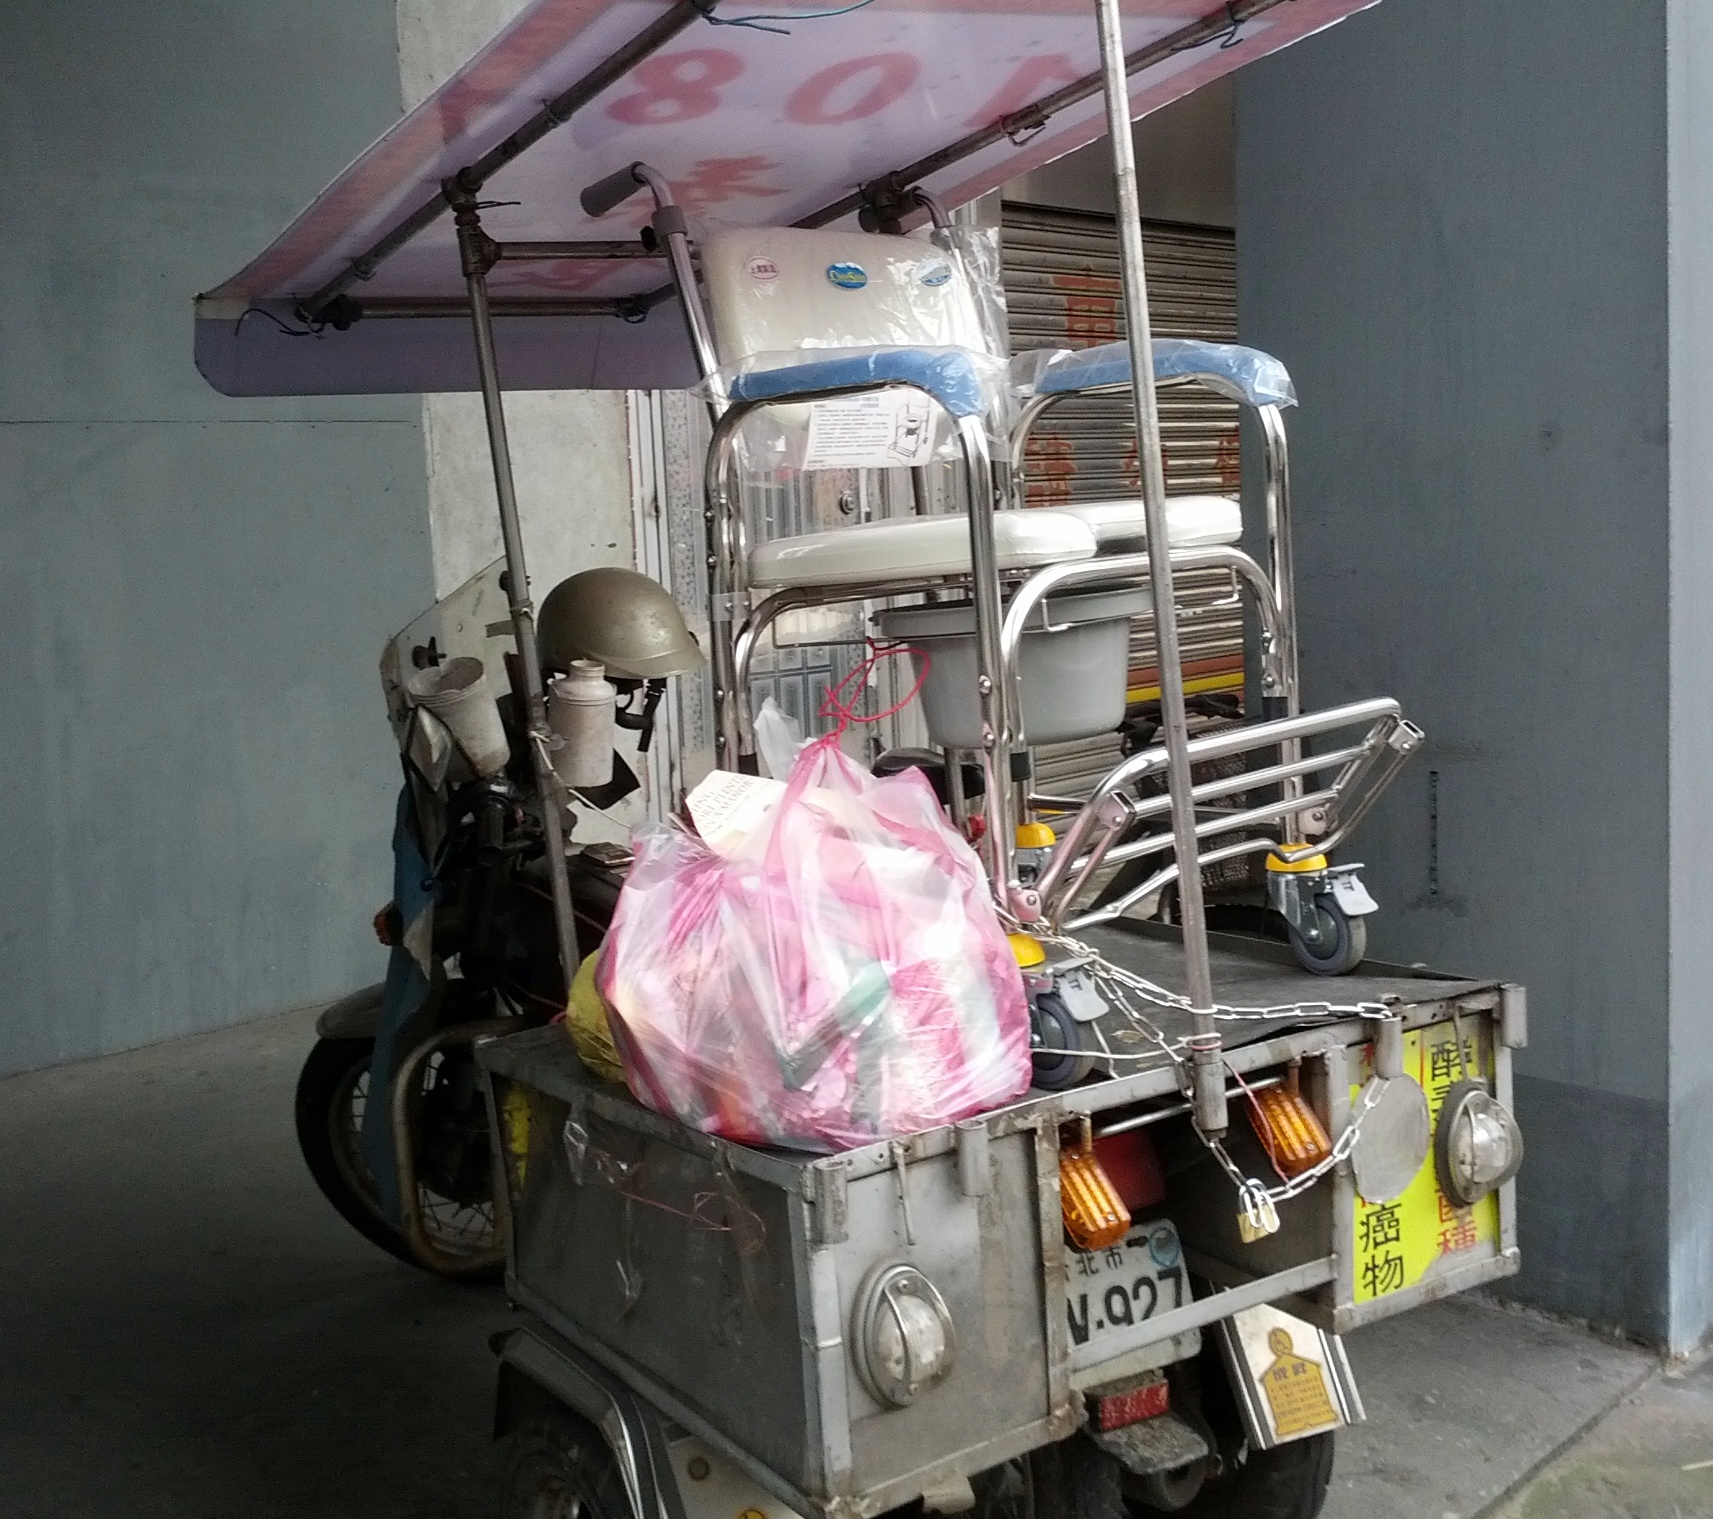 a motorcycle cart is loaded with items from a store